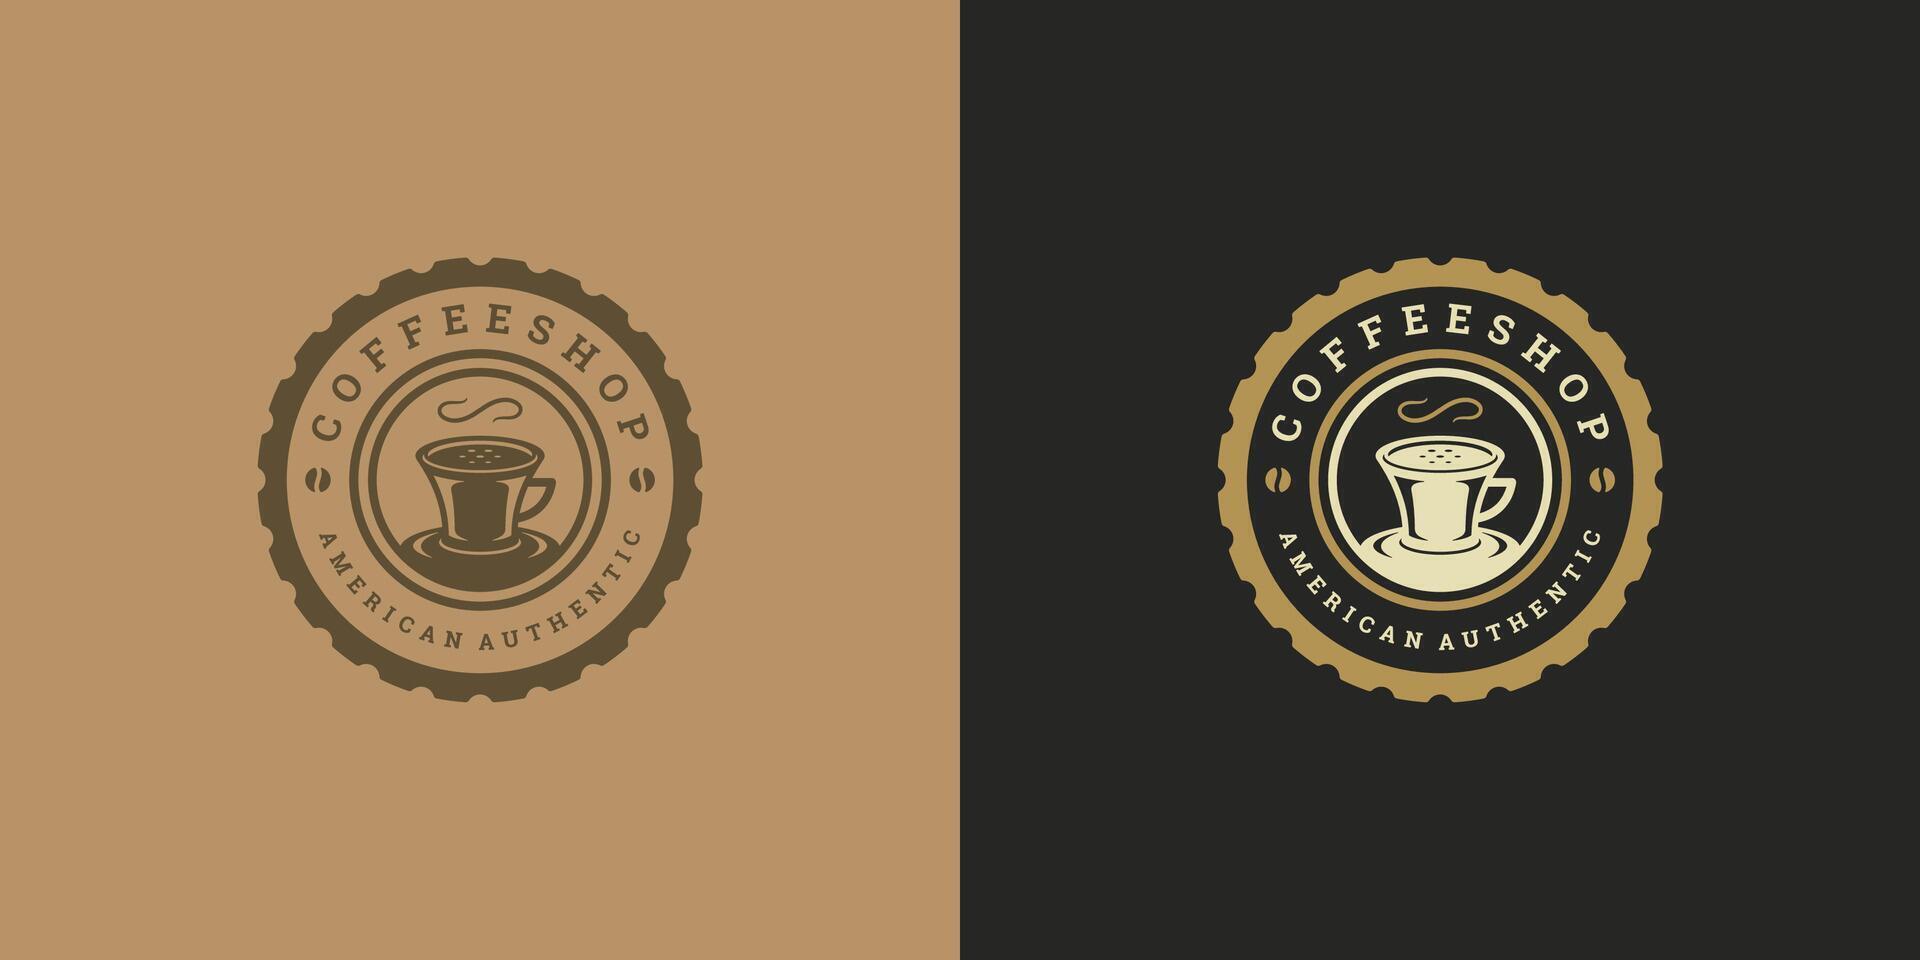 Coffee or tea shop logo template illustration with bean silhouette good for cafe badge design and menu decoration vector